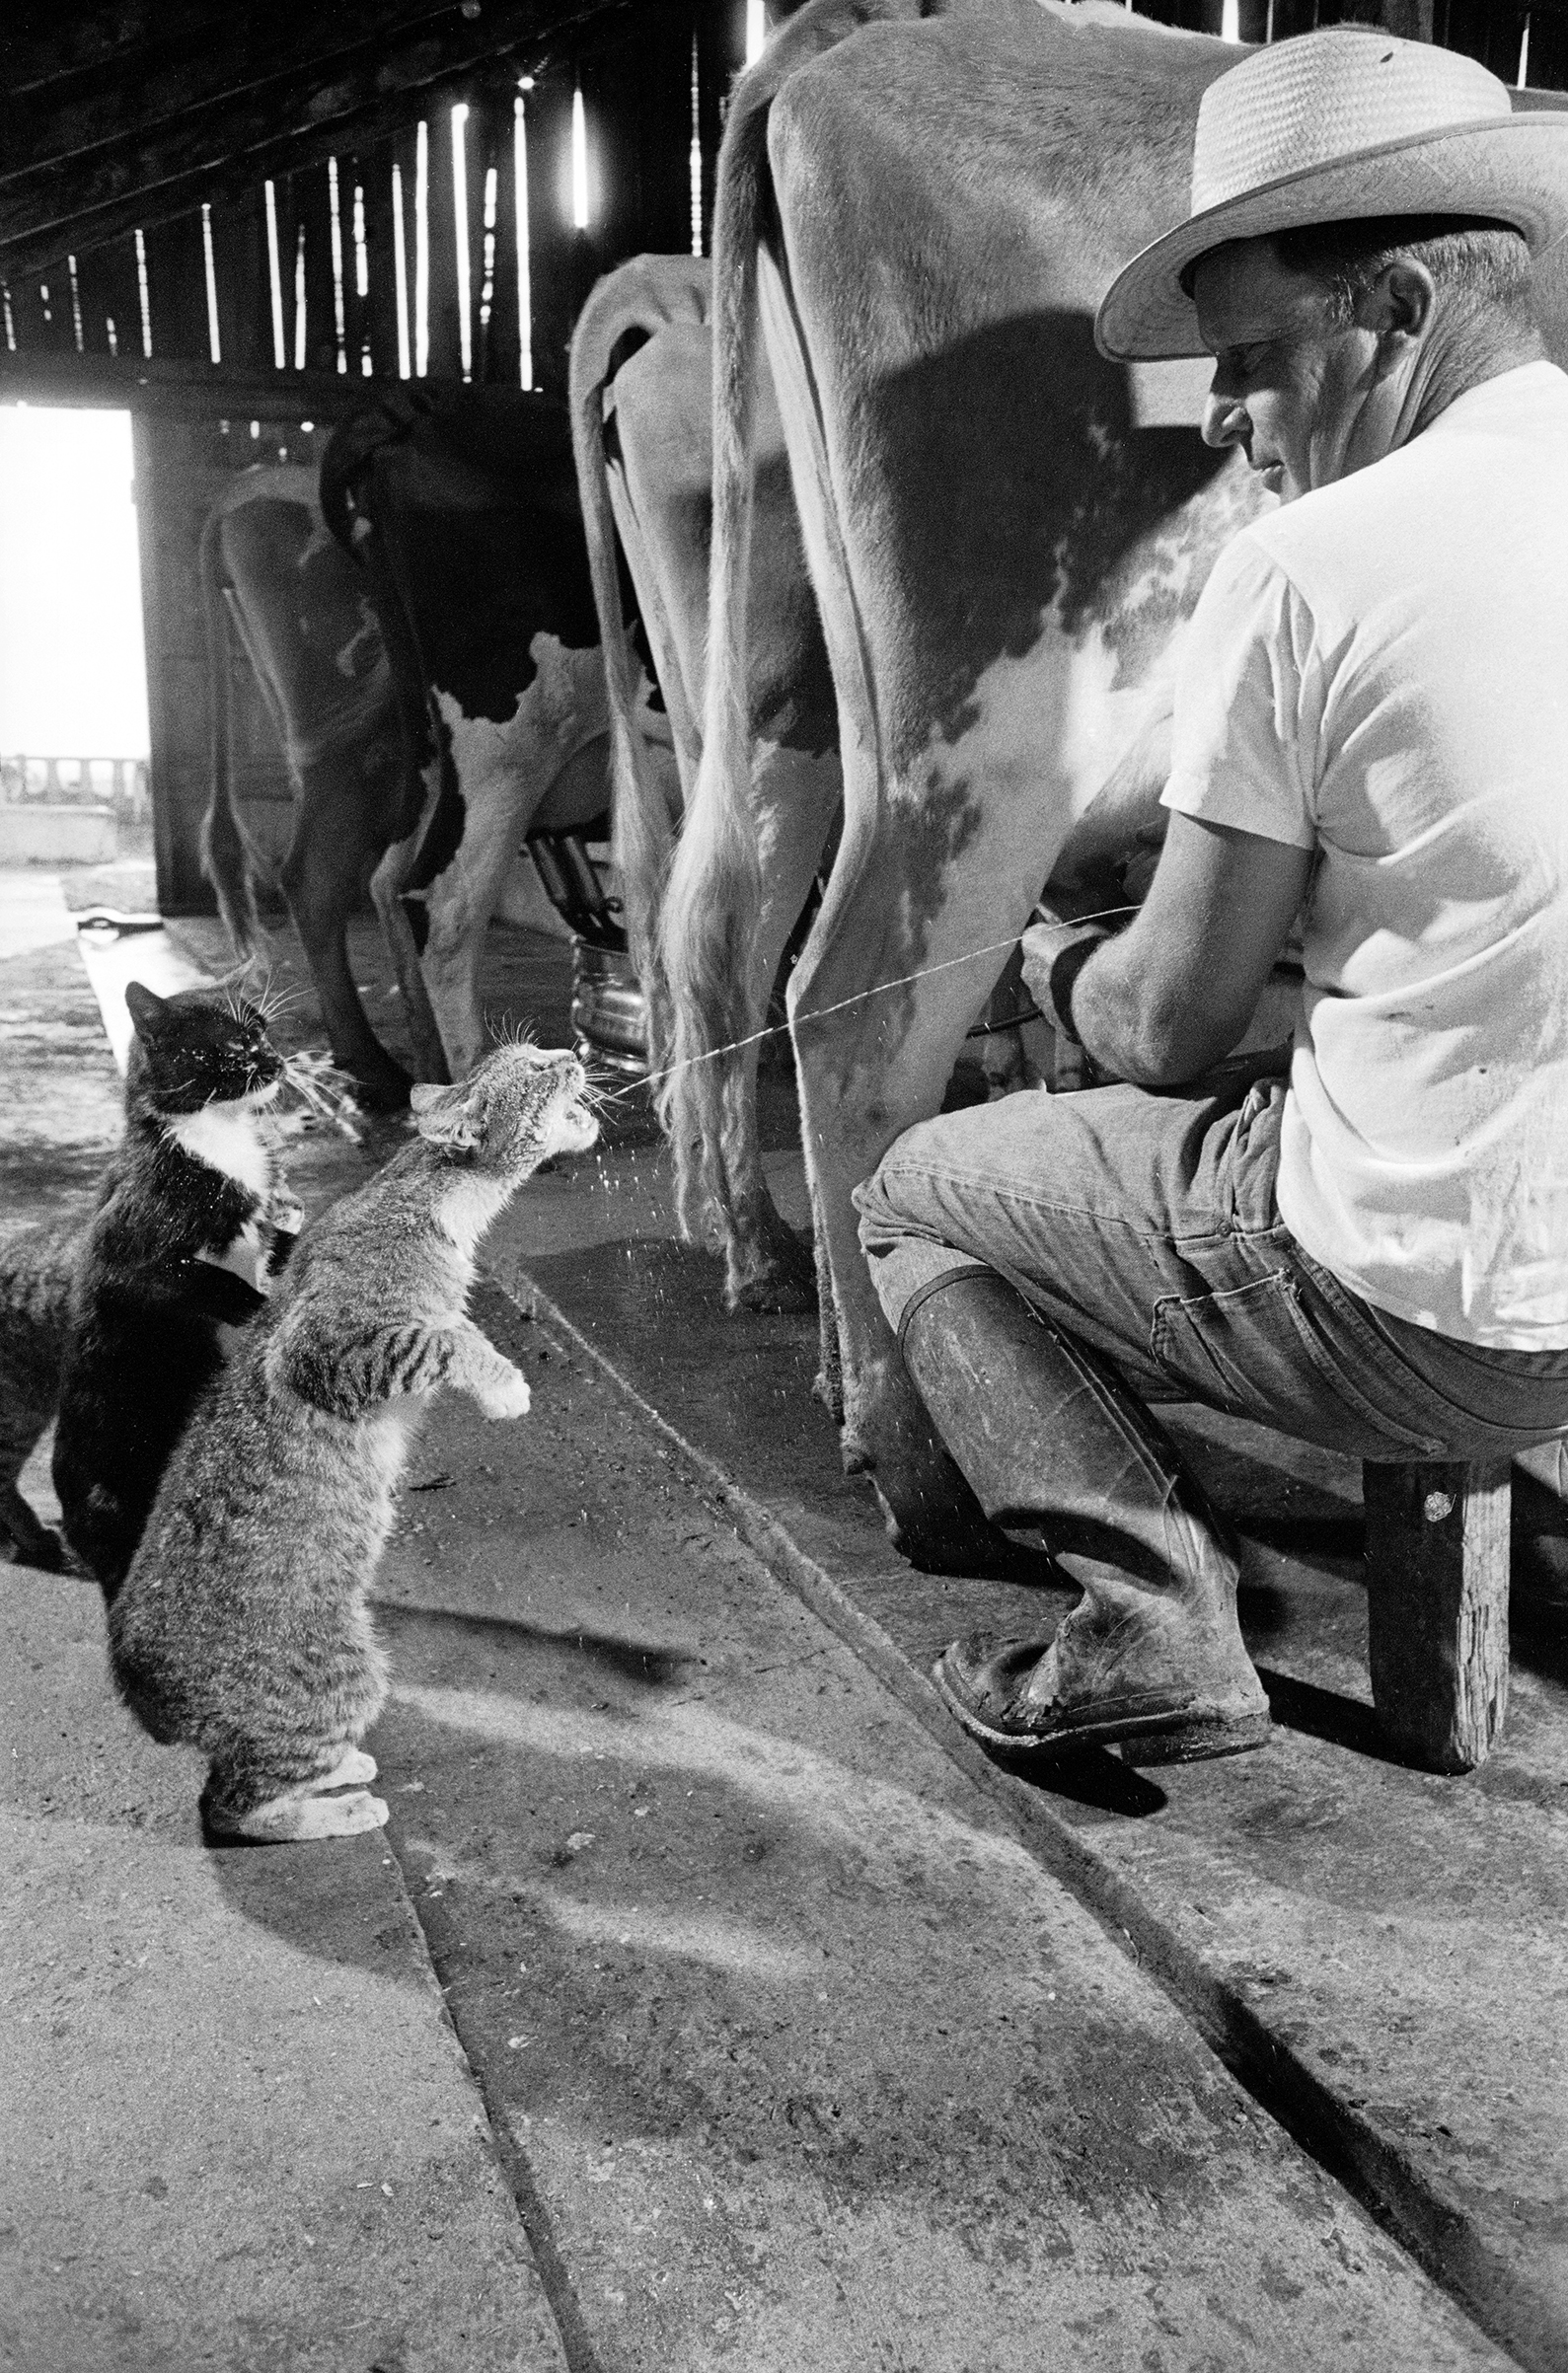 Cats Blackie Brownie catching squirts of milk during milking at Arch Badertscher's dairy farm. 1954.